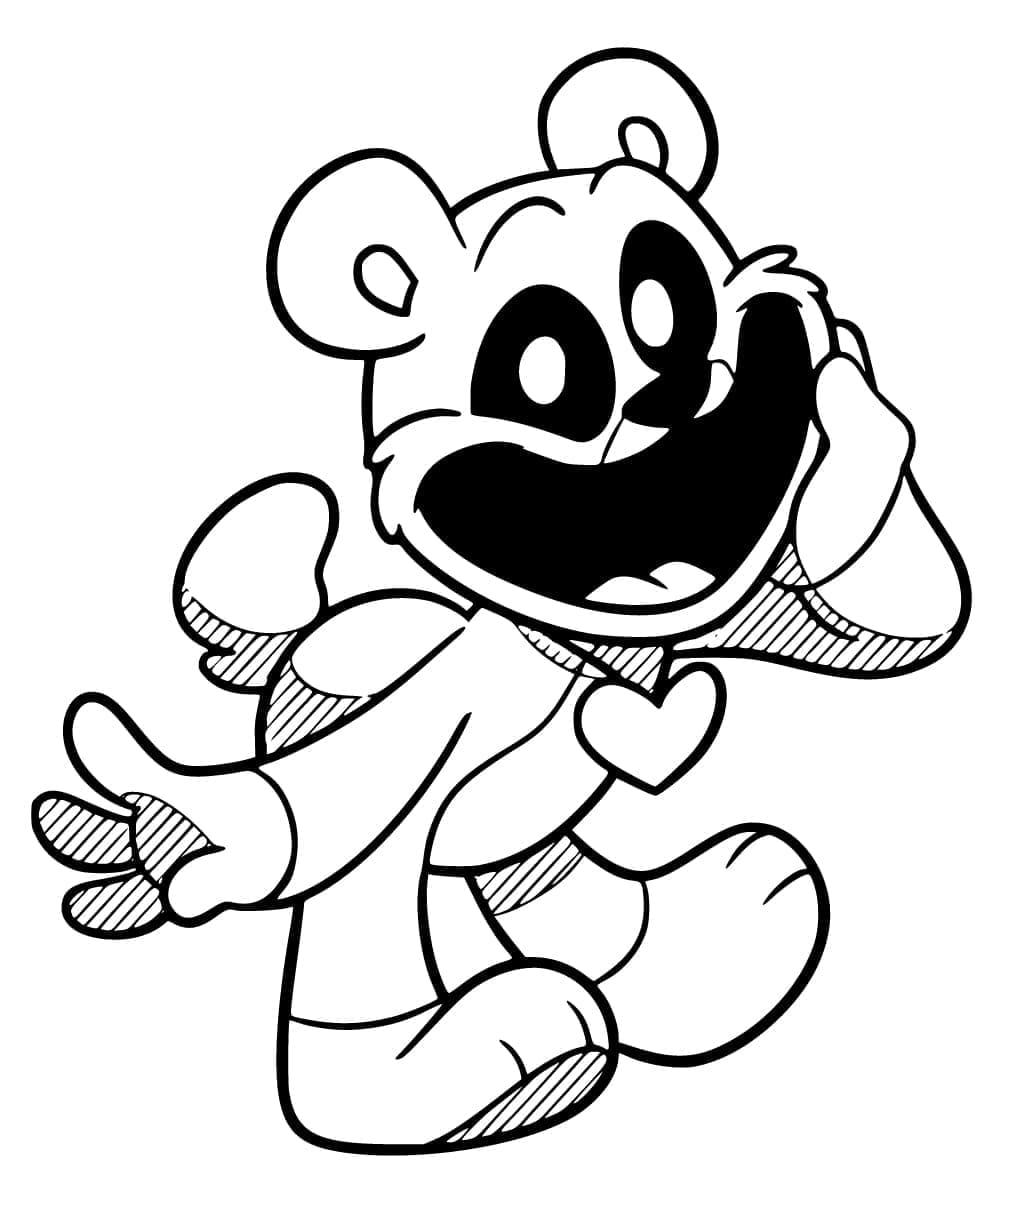 Bobby BearHug de Smiling Critters coloring page